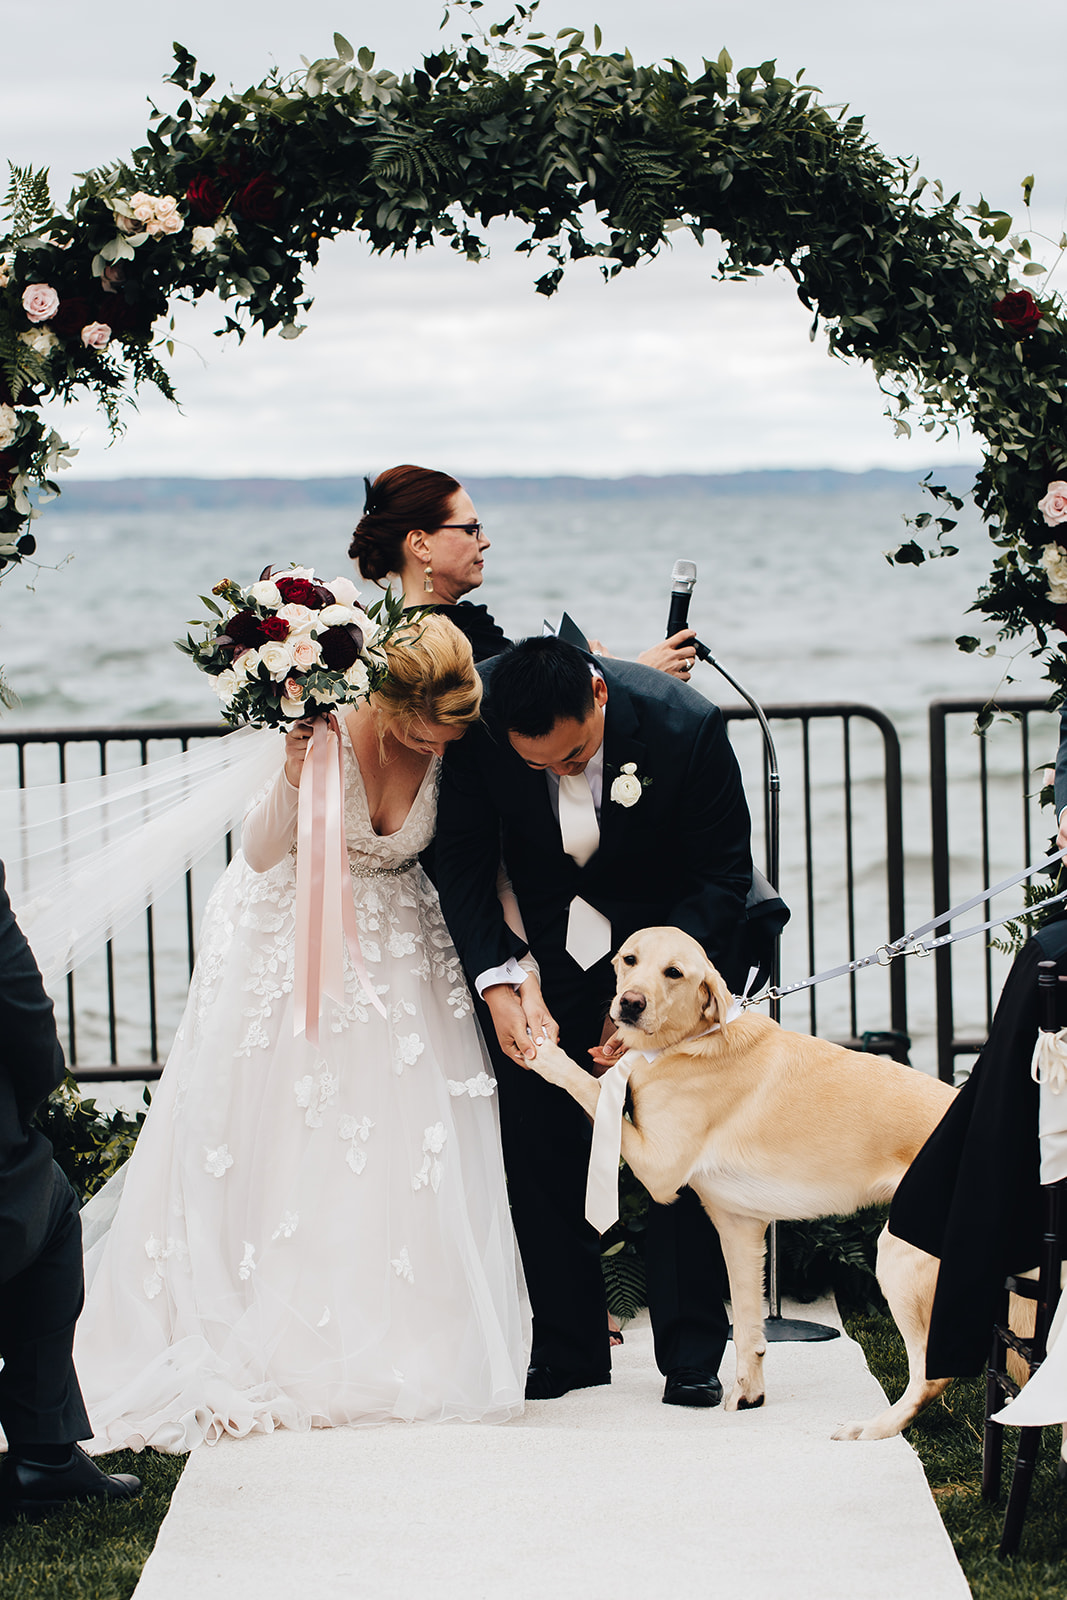 Bride and groom smiling at their dog at alter